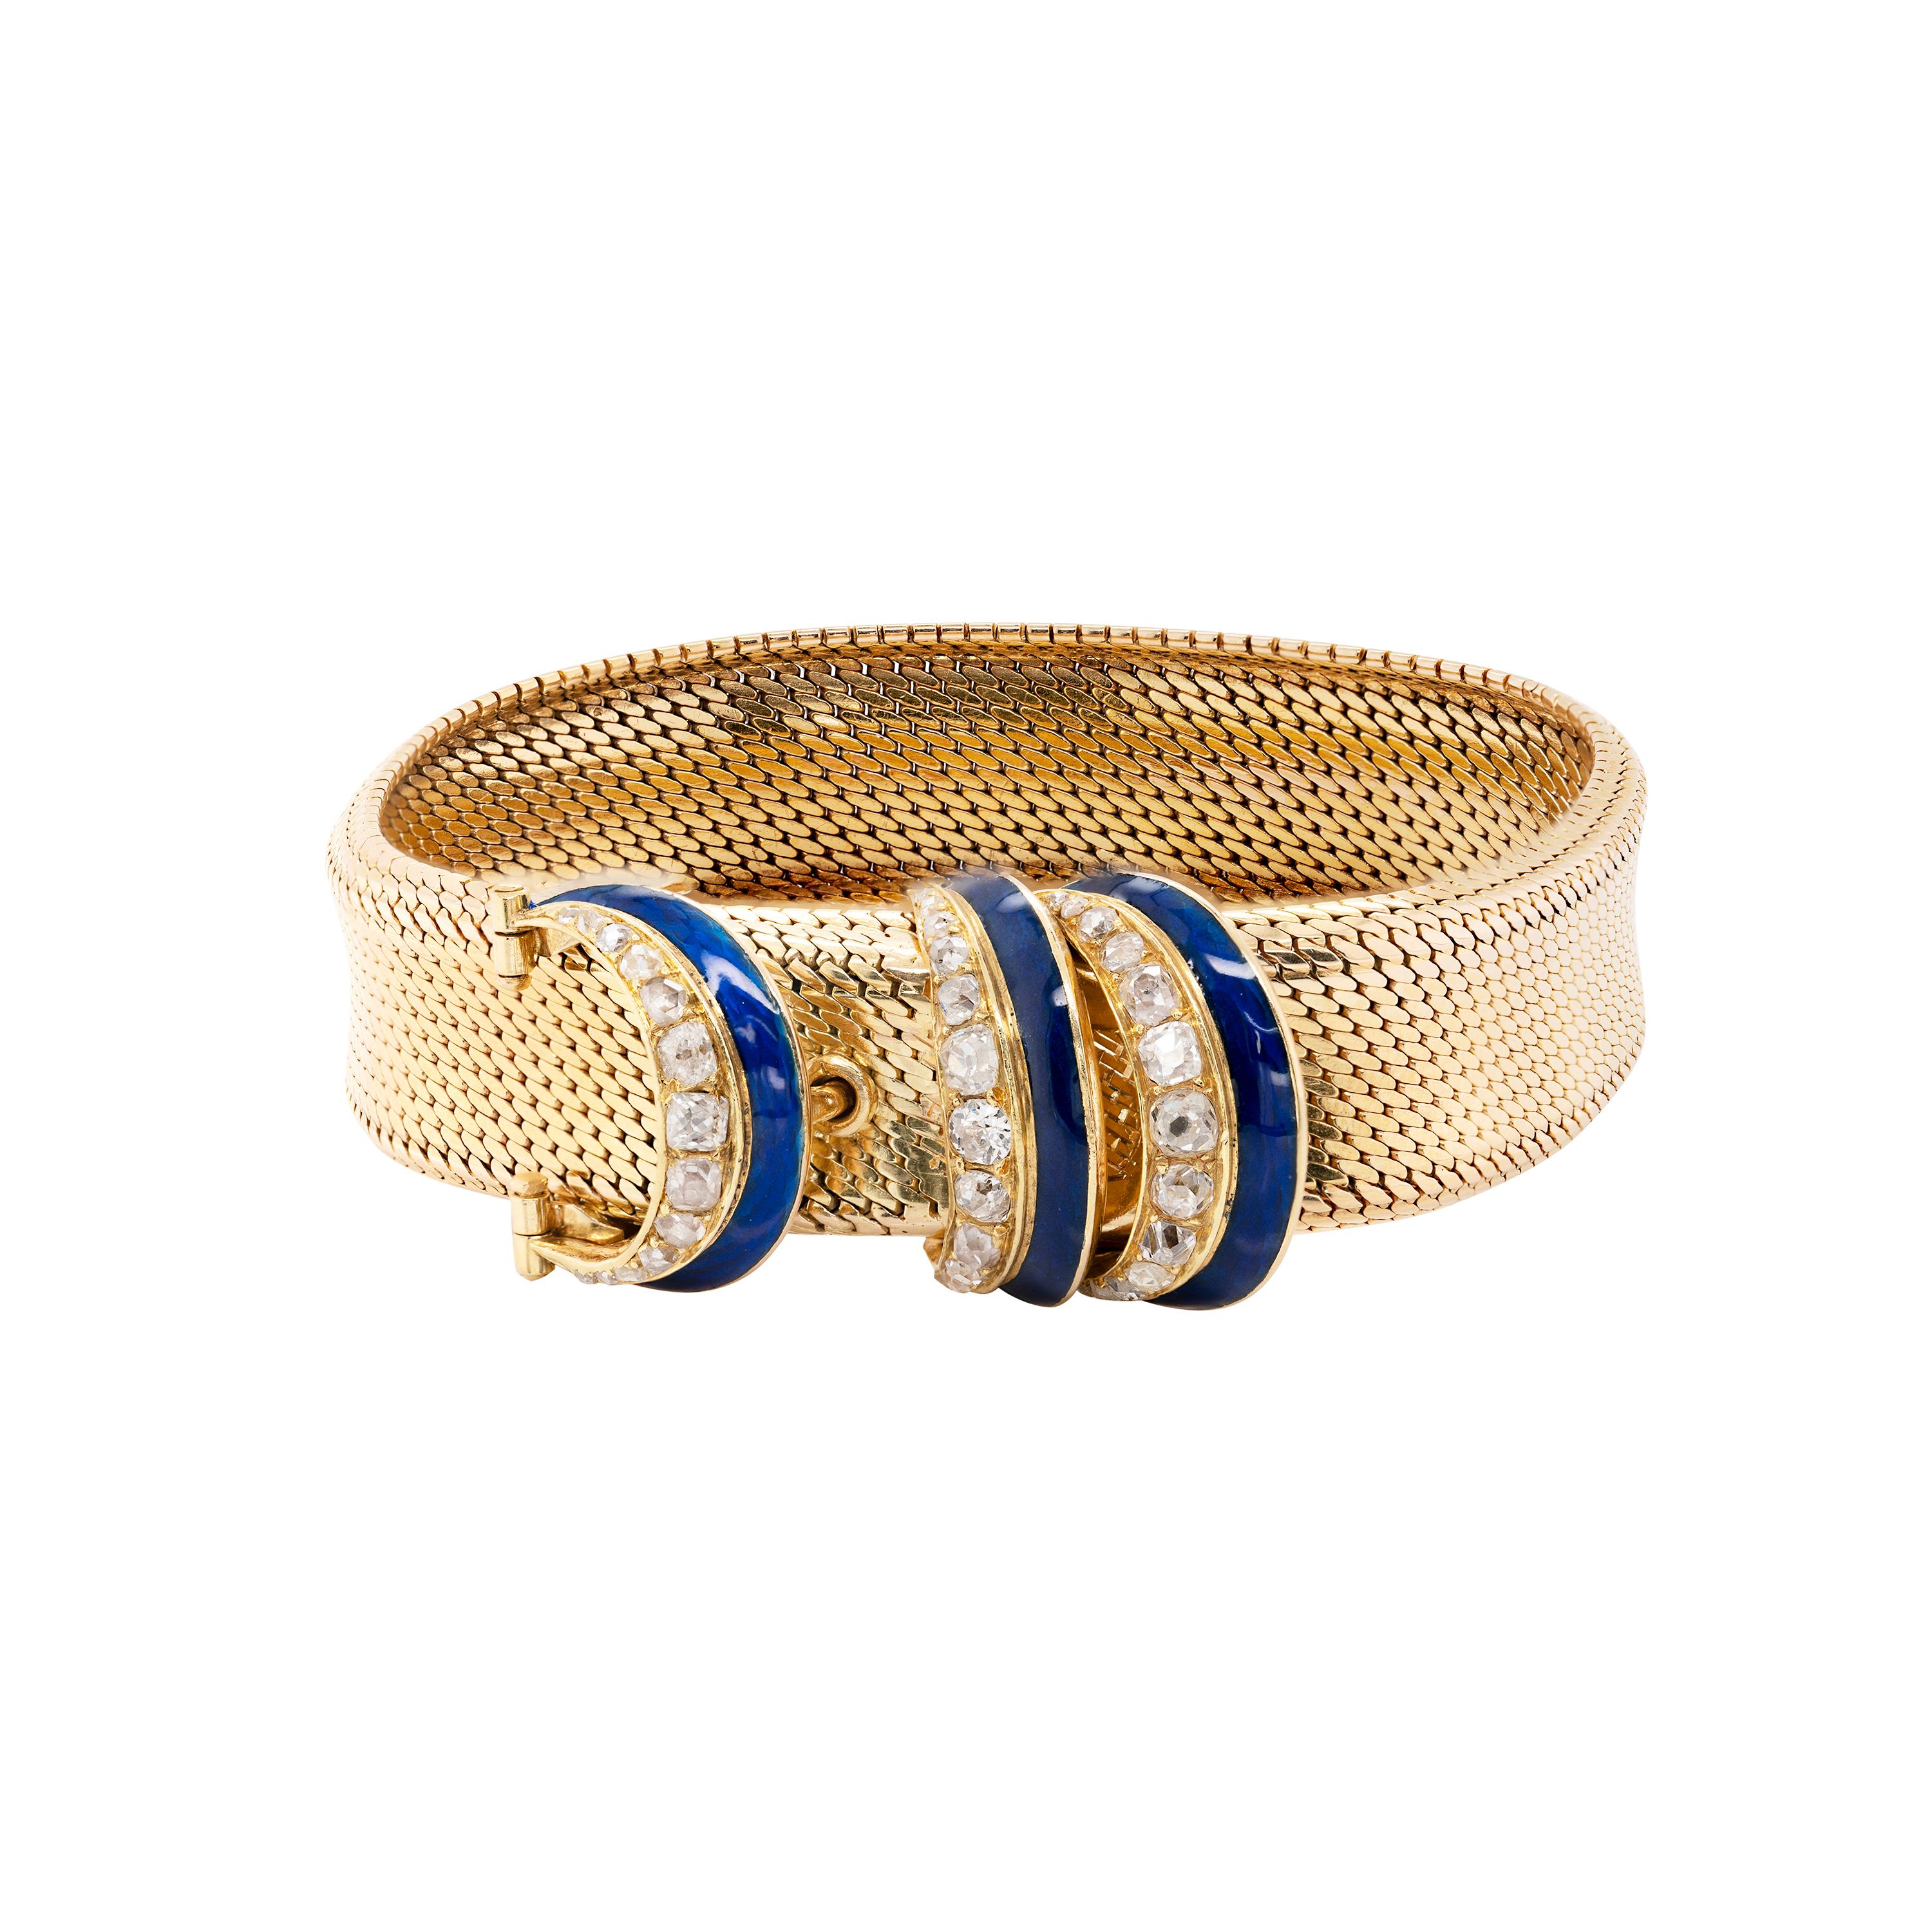 Unique and spectacular, this antique piece is designed as a flexible mesh belt and buckle bracelet masterfully crafted from 18 carat yellow gold. The buckle fastening and the two loops fitted above it are each beautifully adorned with a row of